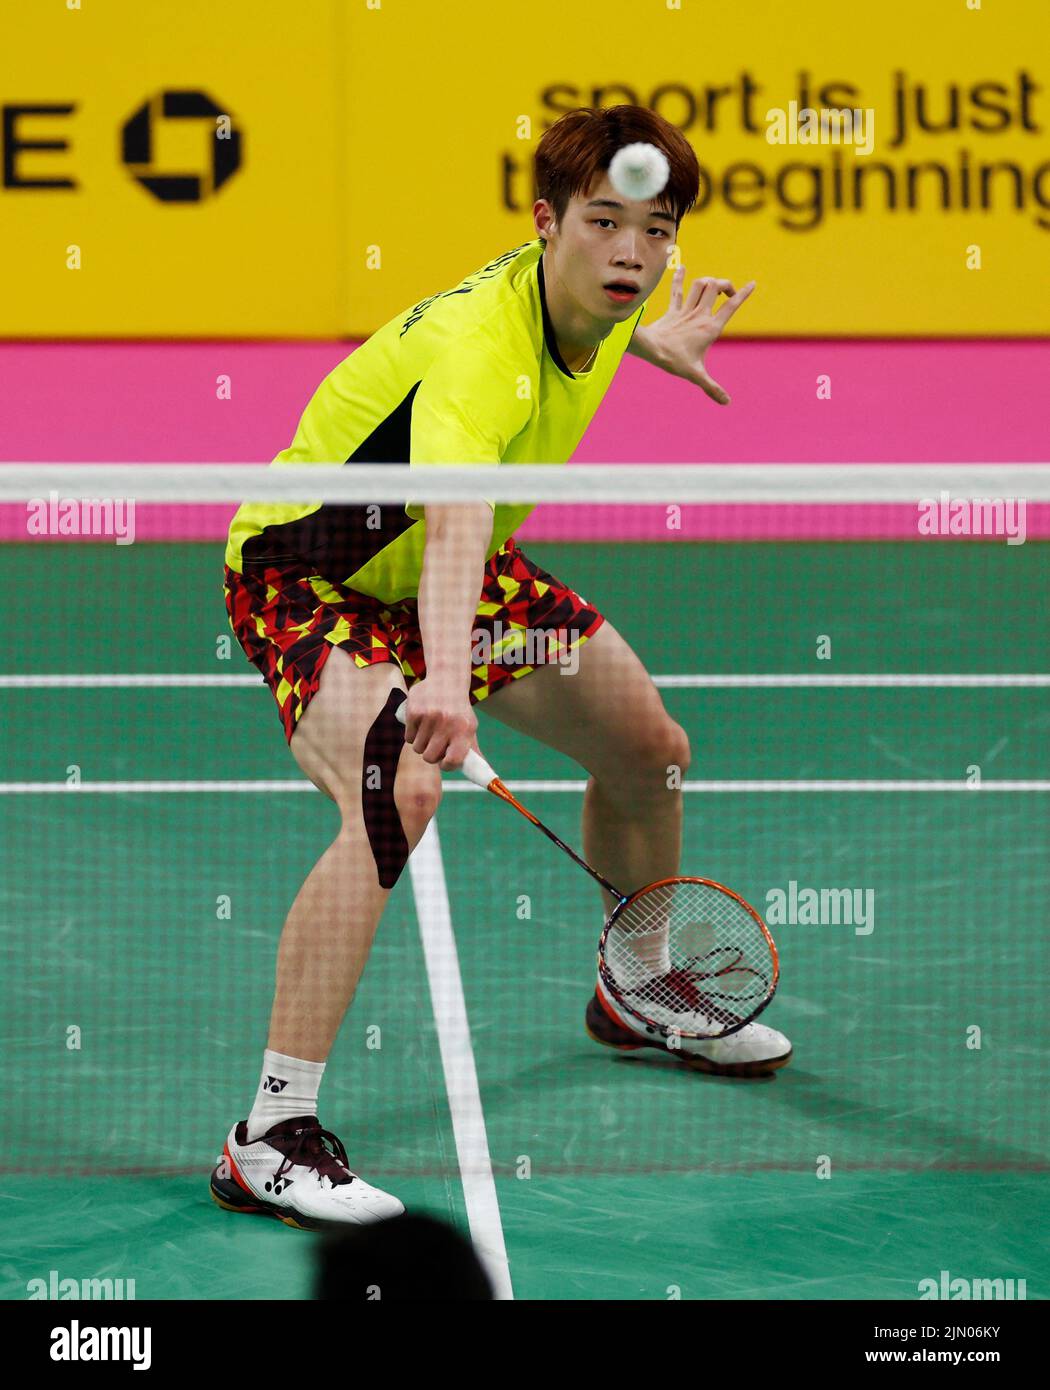 Commonwealth Games - Badminton - Men's Singles - Gold Medal Match - The NEC Hall 5, Birmingham, Britain - August 8, 2022  Malaysia's Tze Yong Ng in action against India's Lakshya Sen REUTERS/Jason Cairnduff Stock Photo